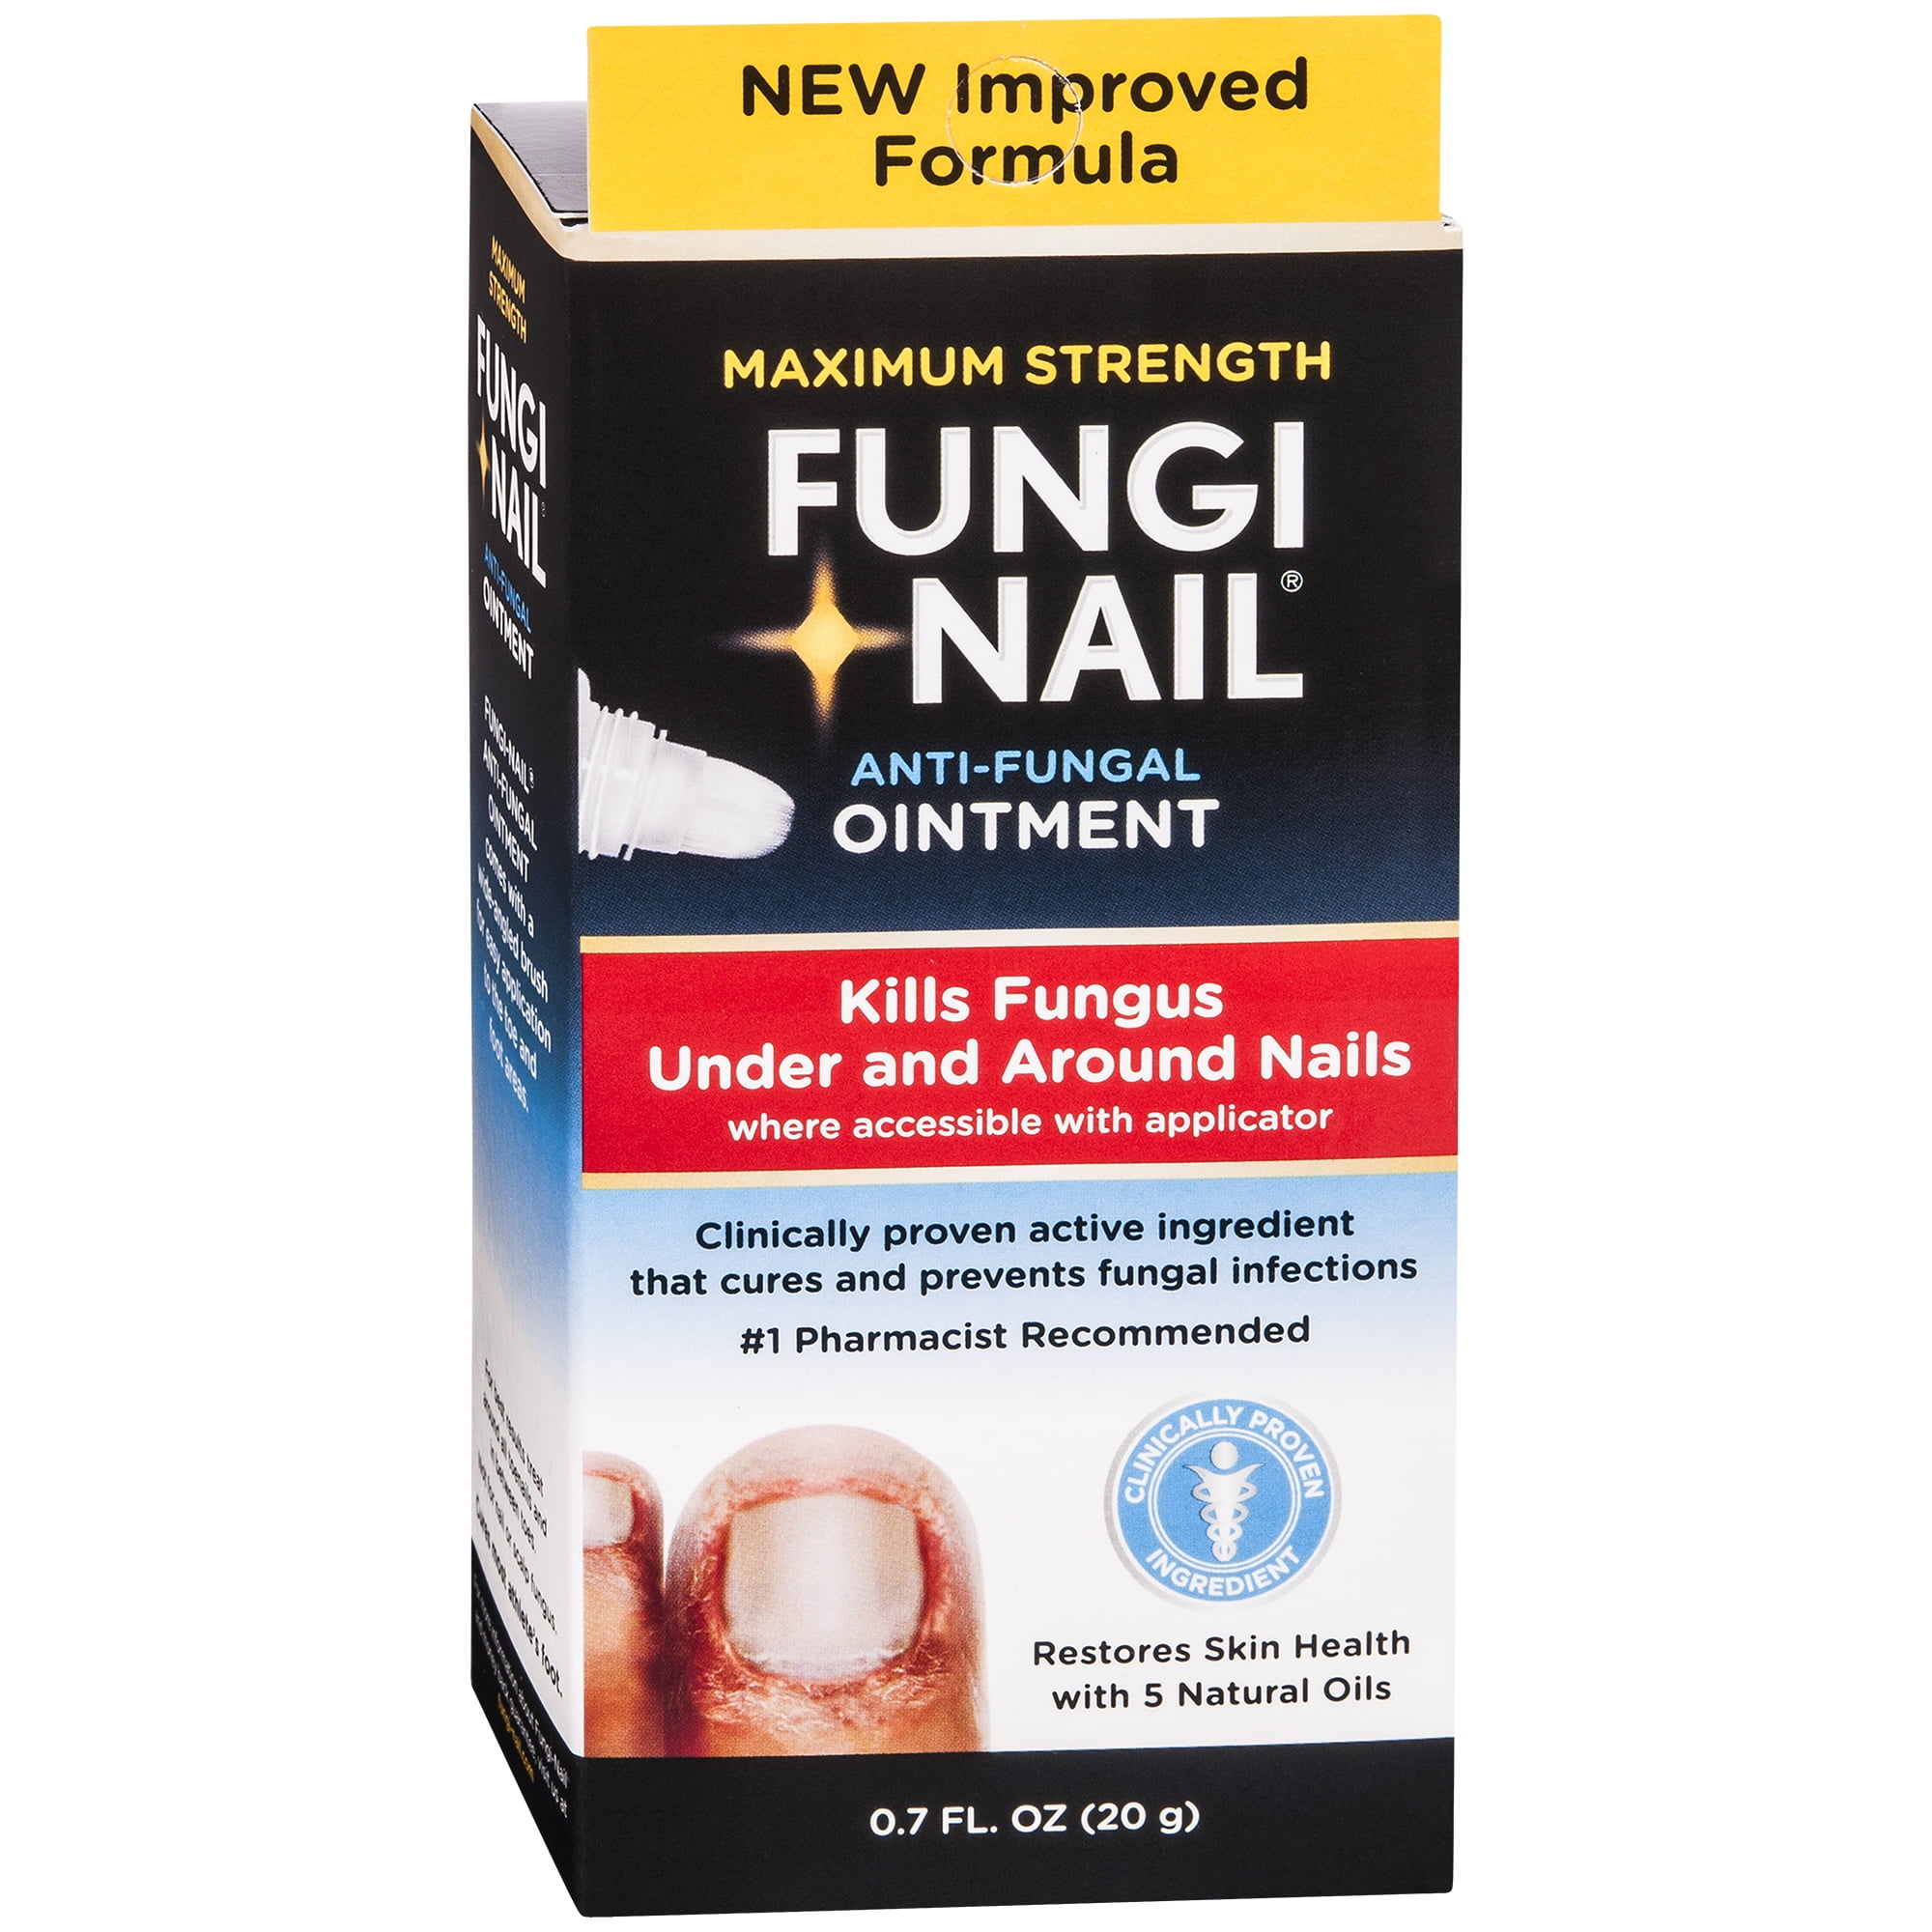 What You Should Know about Toenail Fungus Medication